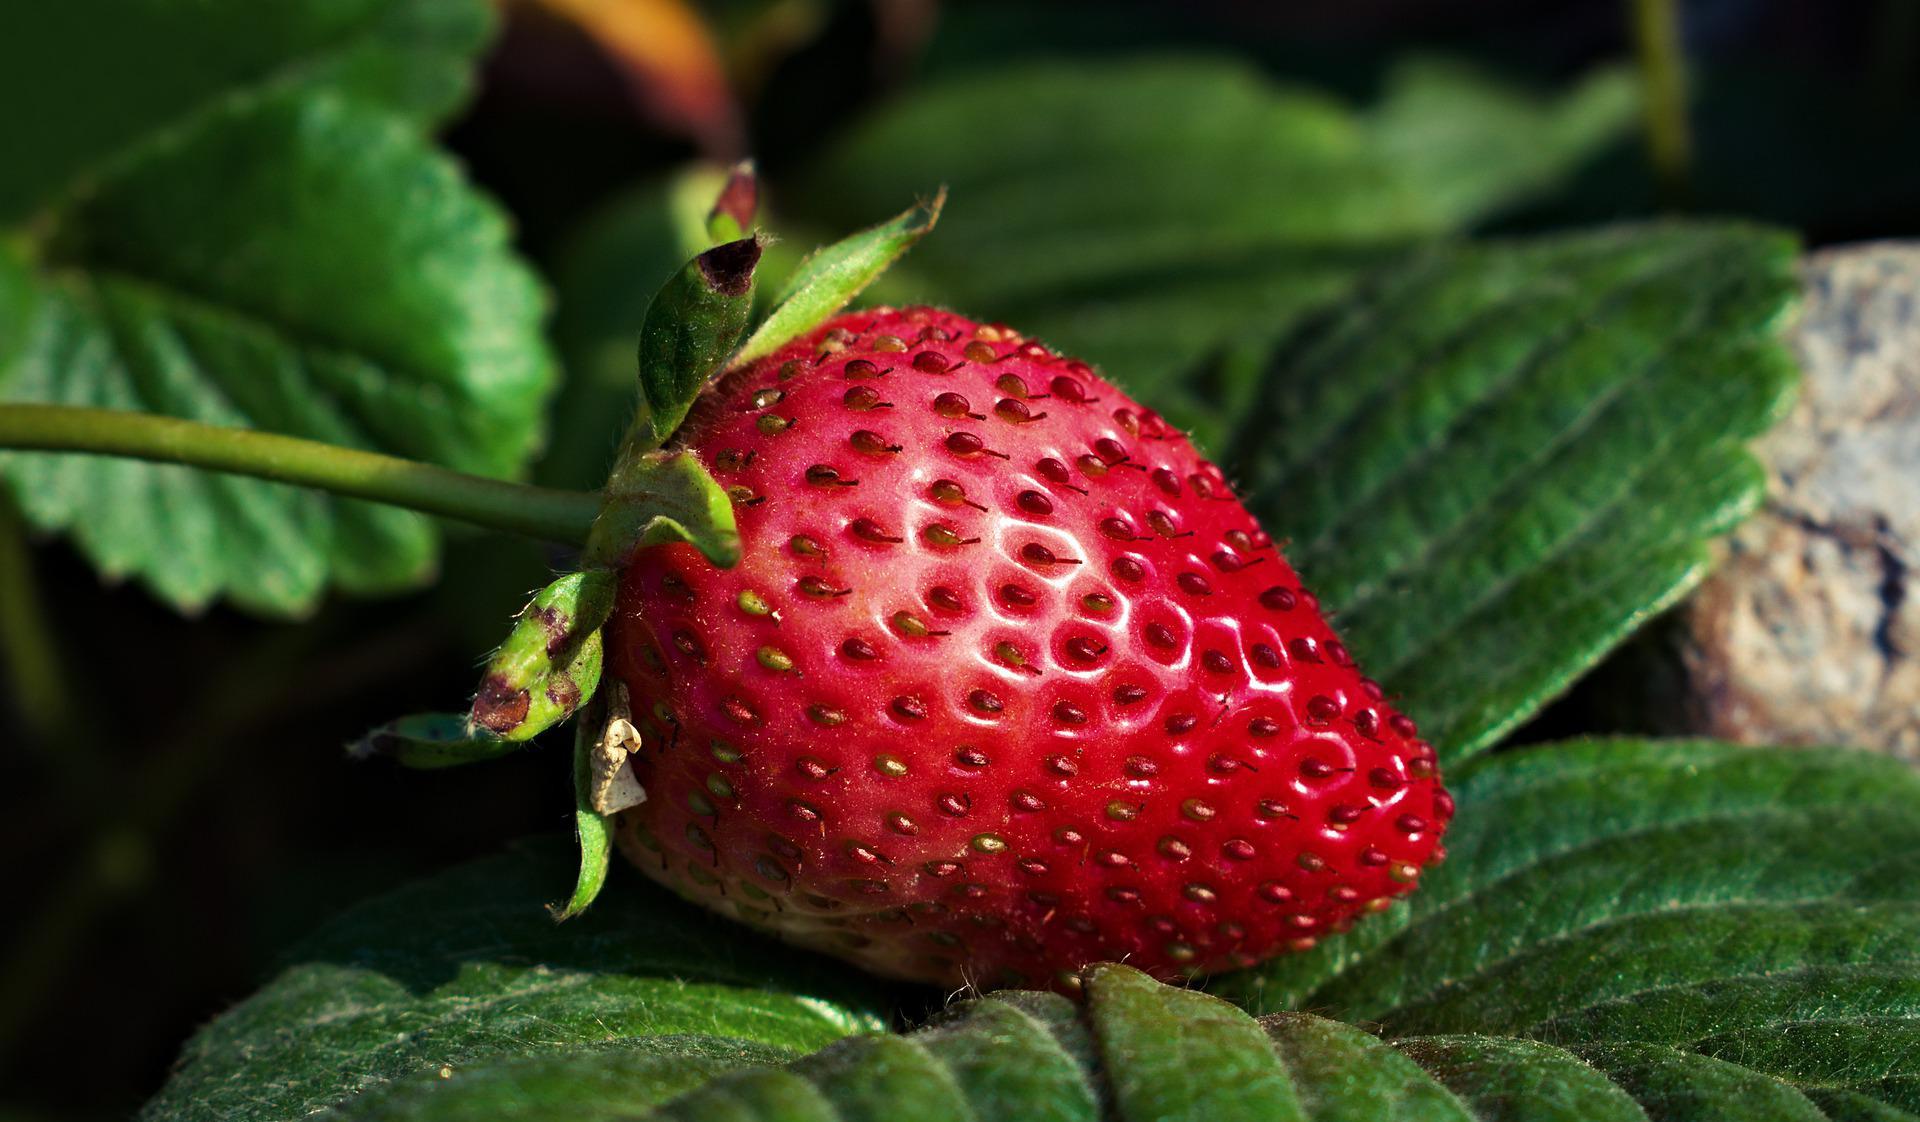 close-up image of a strawberry growing